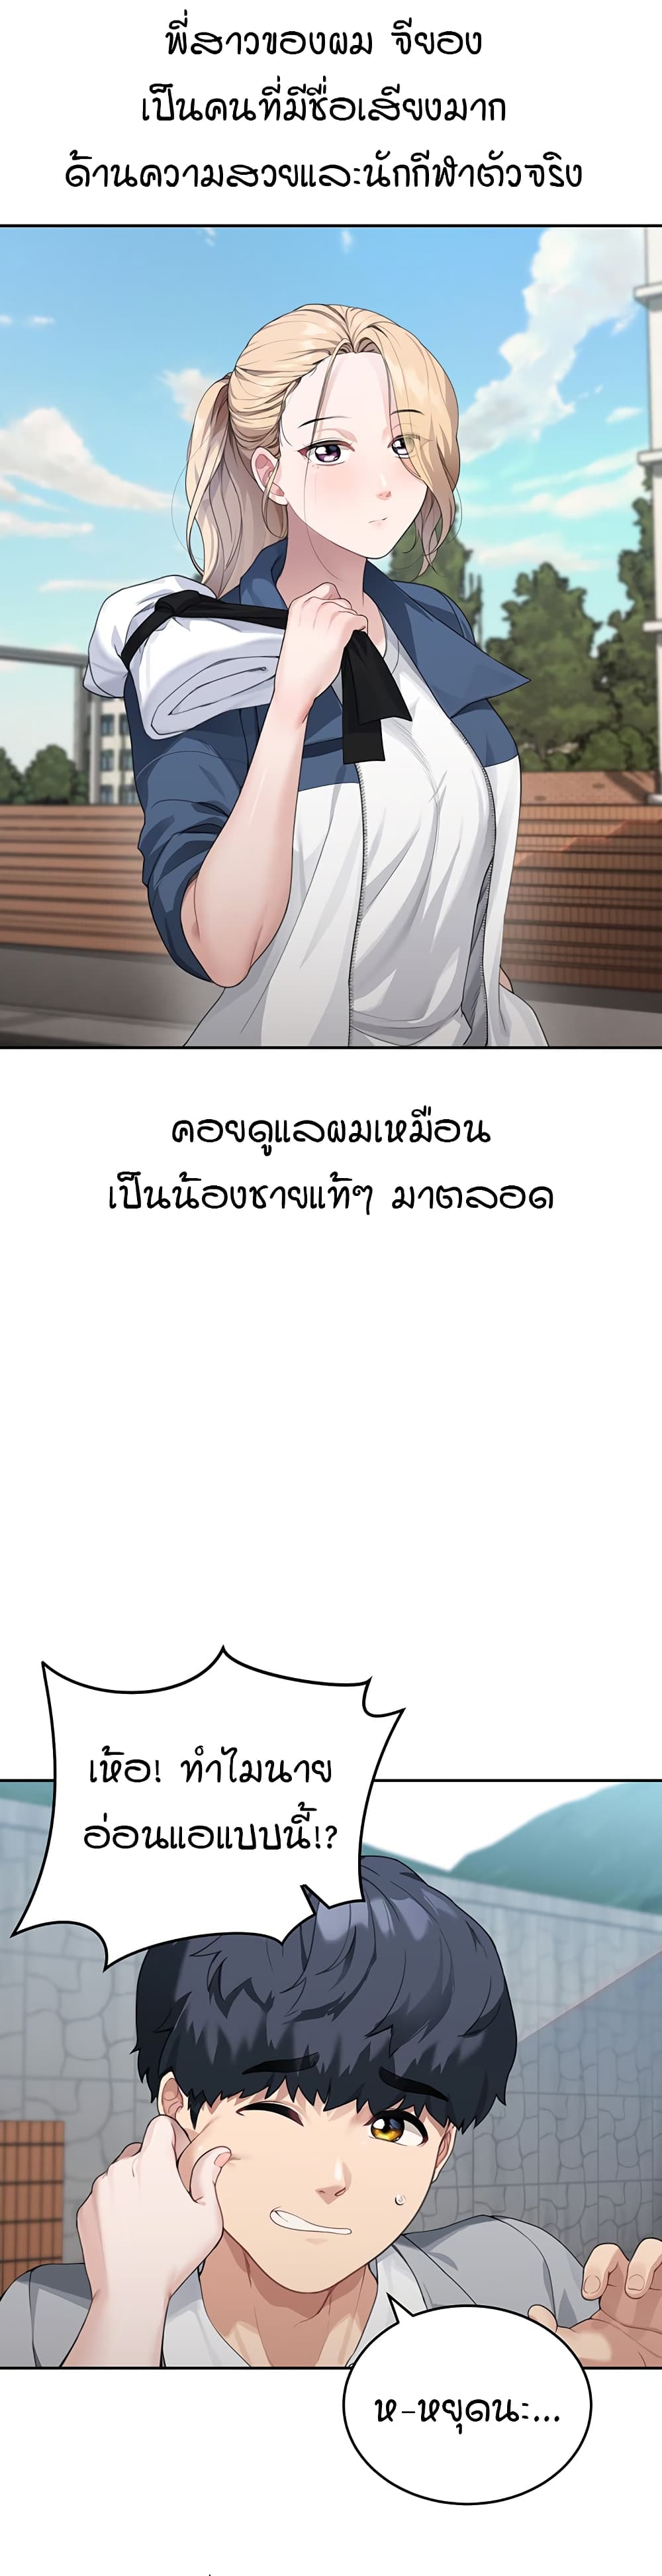 Is It Your Mother or Sister? ตอนที่ 1 ภาพ 16